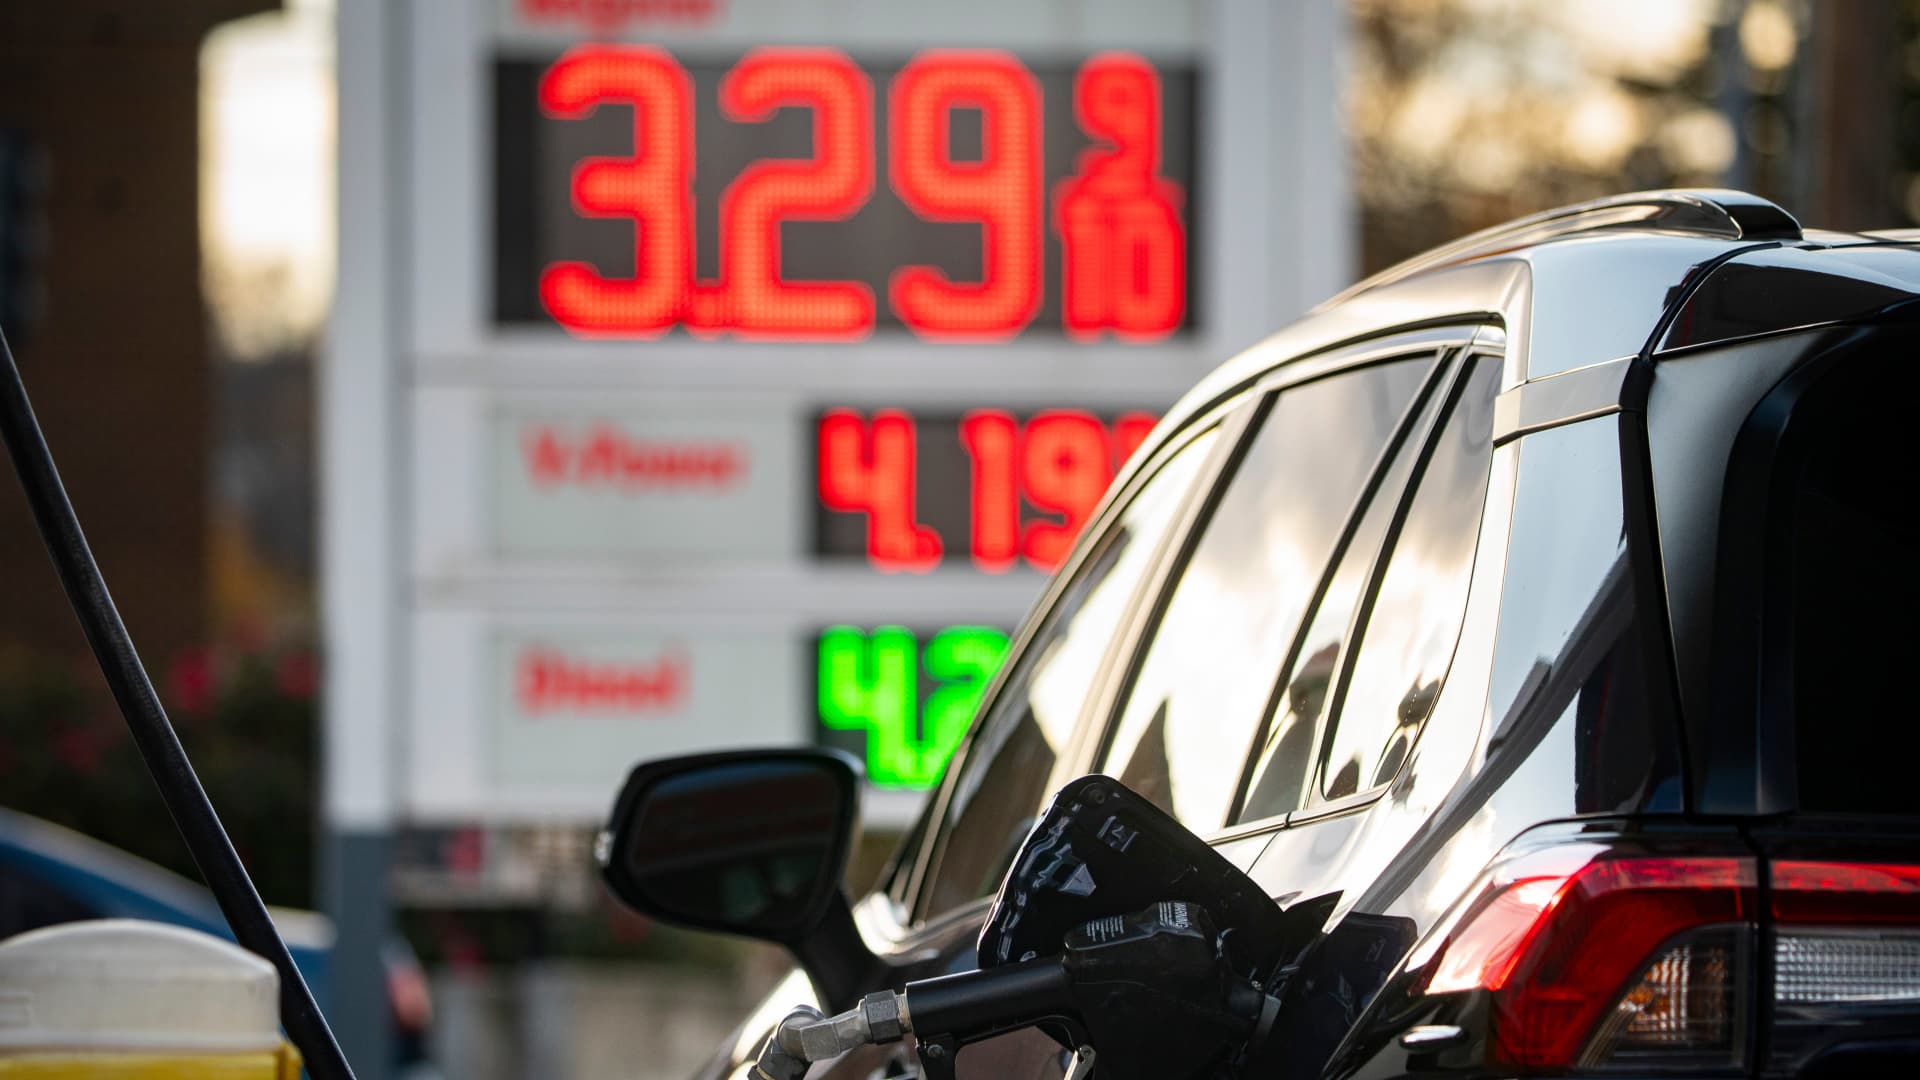 Gas prices have fallen 19% since September, hit lowest point of year ahead of holiday